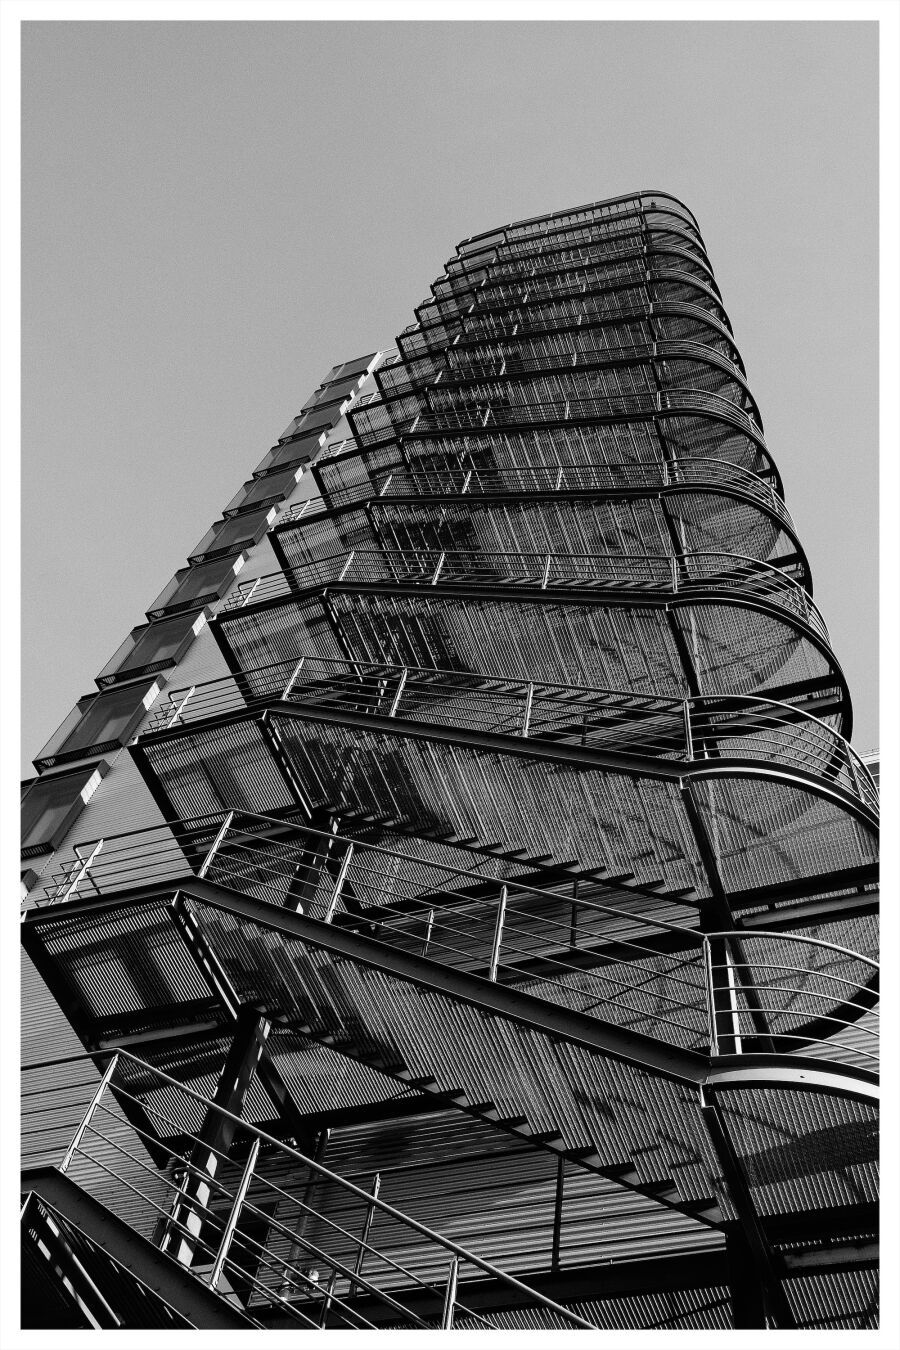 Black and white photo of an exterior spiral staircase on a modern building, showcasing geometric patterns and architectural design